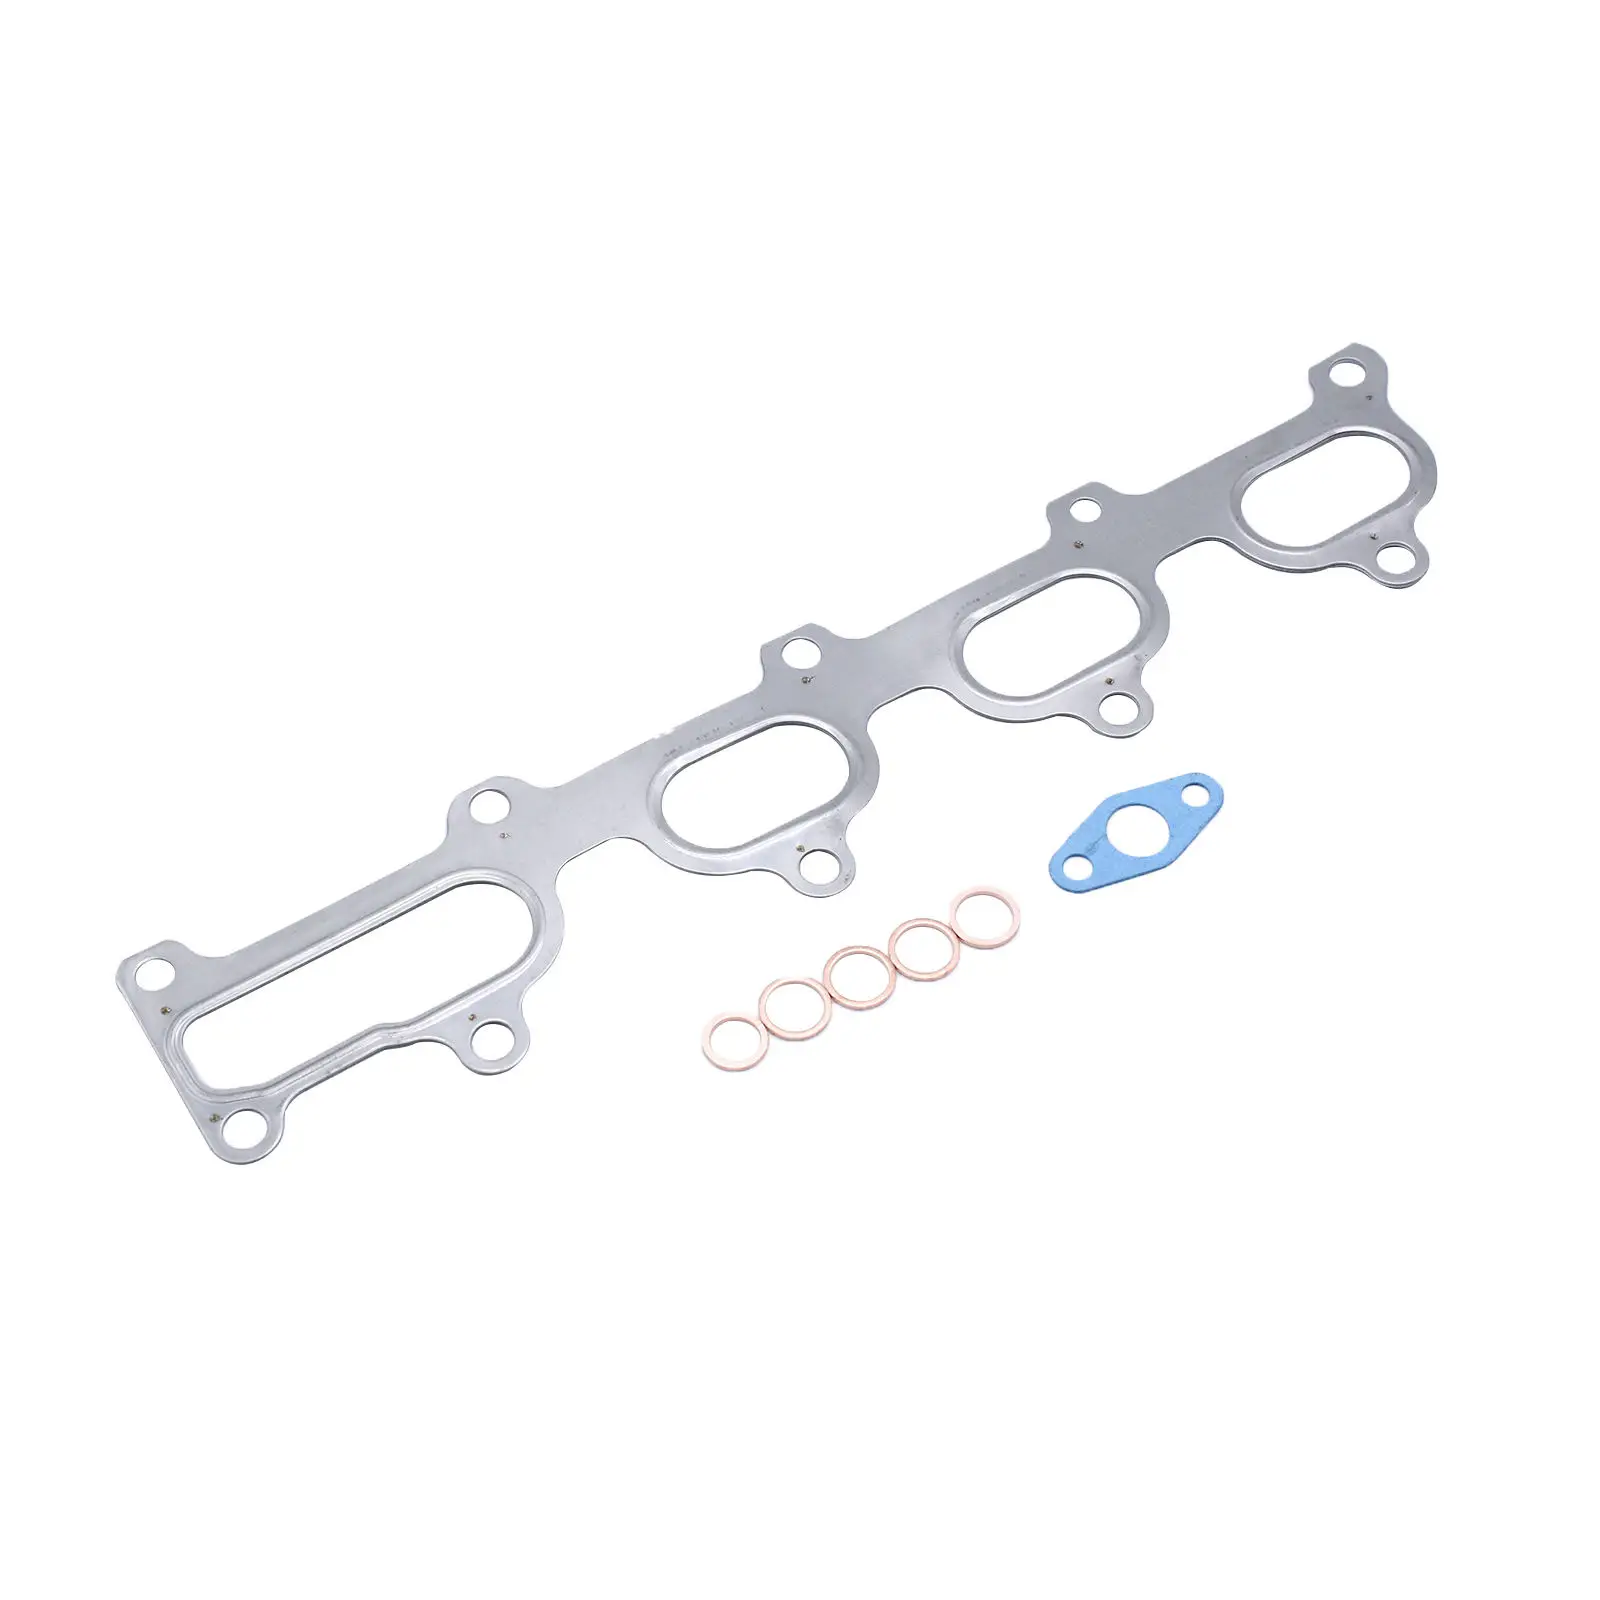 Exhaust Manifold Gasket Prevent Leakage for Vauxhall 04-10 5304-980-0024 5304-970-0049 5304-988-0024 90423508